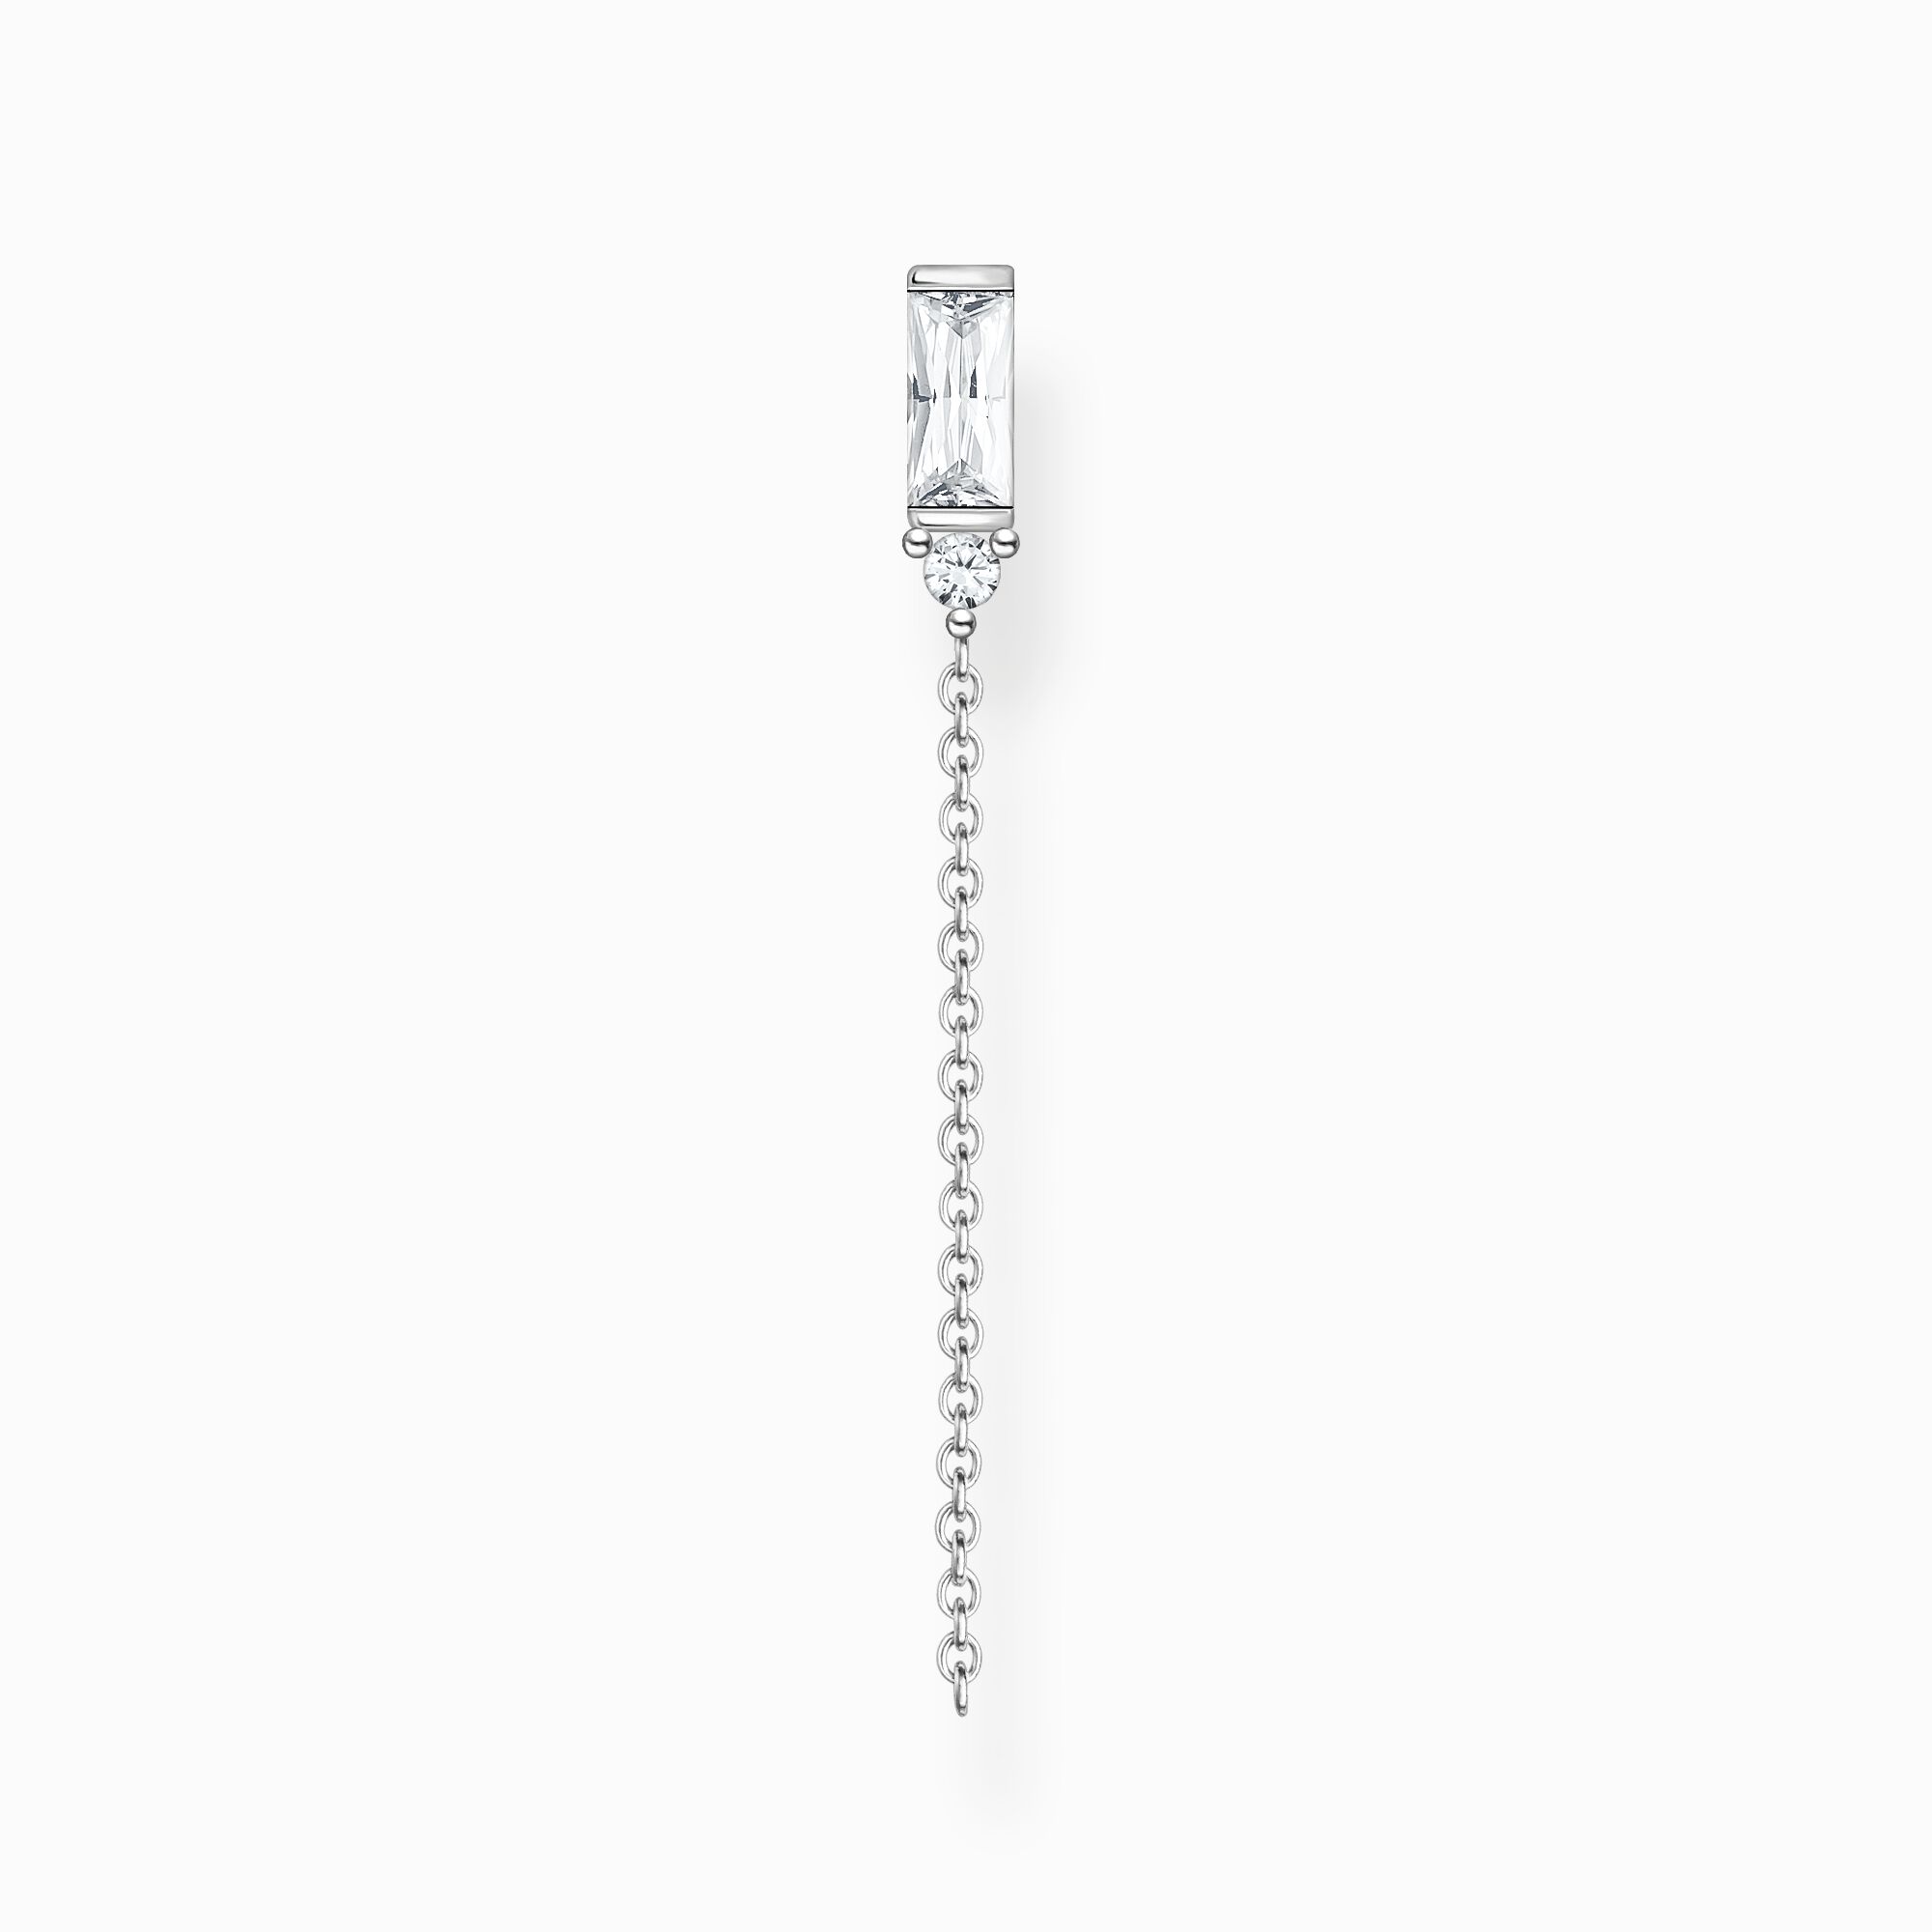 Single earring white stone silver from the Charming Collection collection in the THOMAS SABO online store